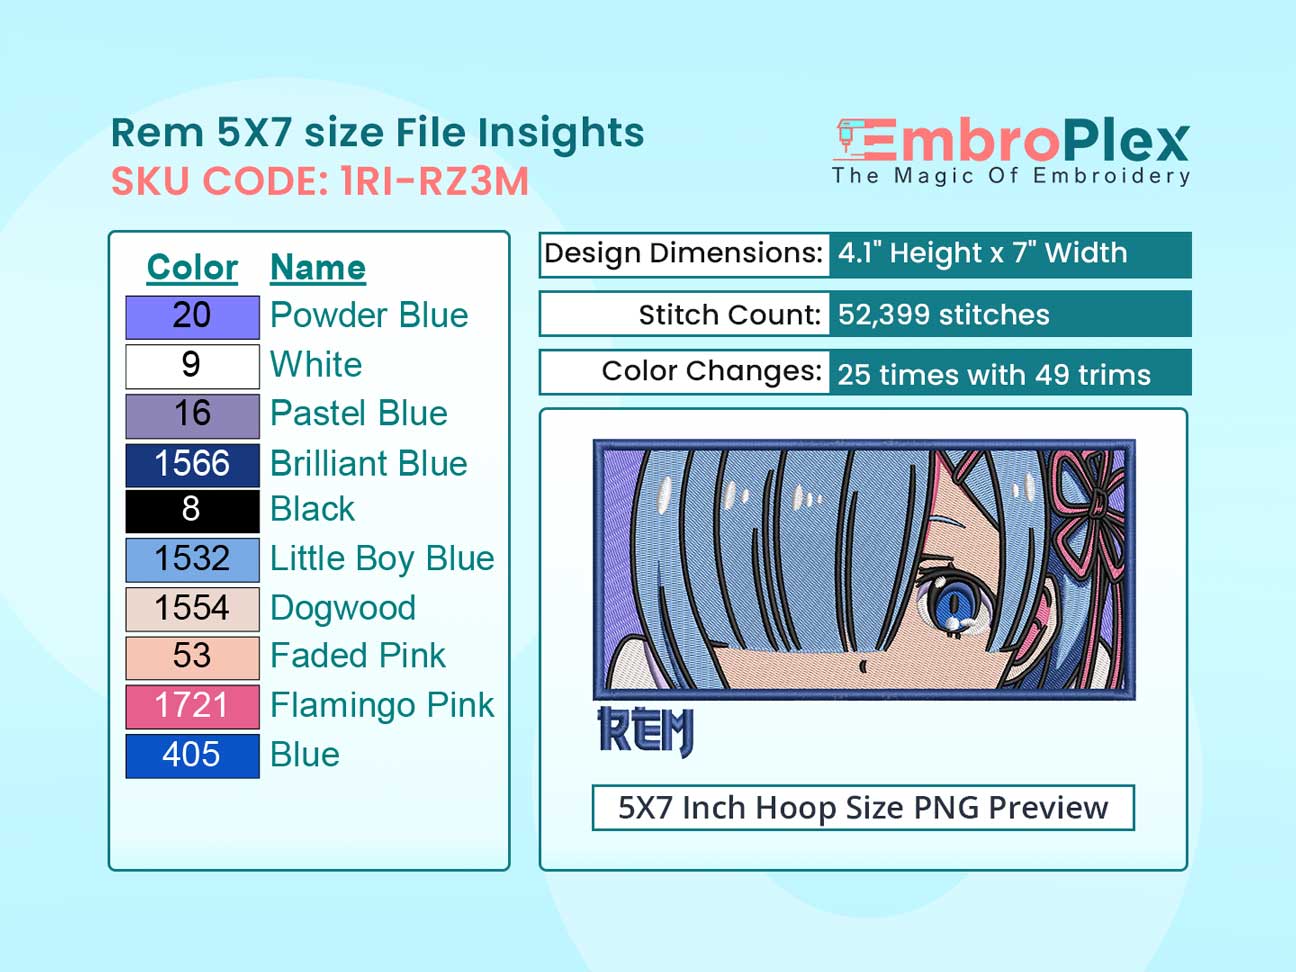 Anime-Inspired Rem Embroidery Design File - 5x7 Inch hoop Size Variation overview image